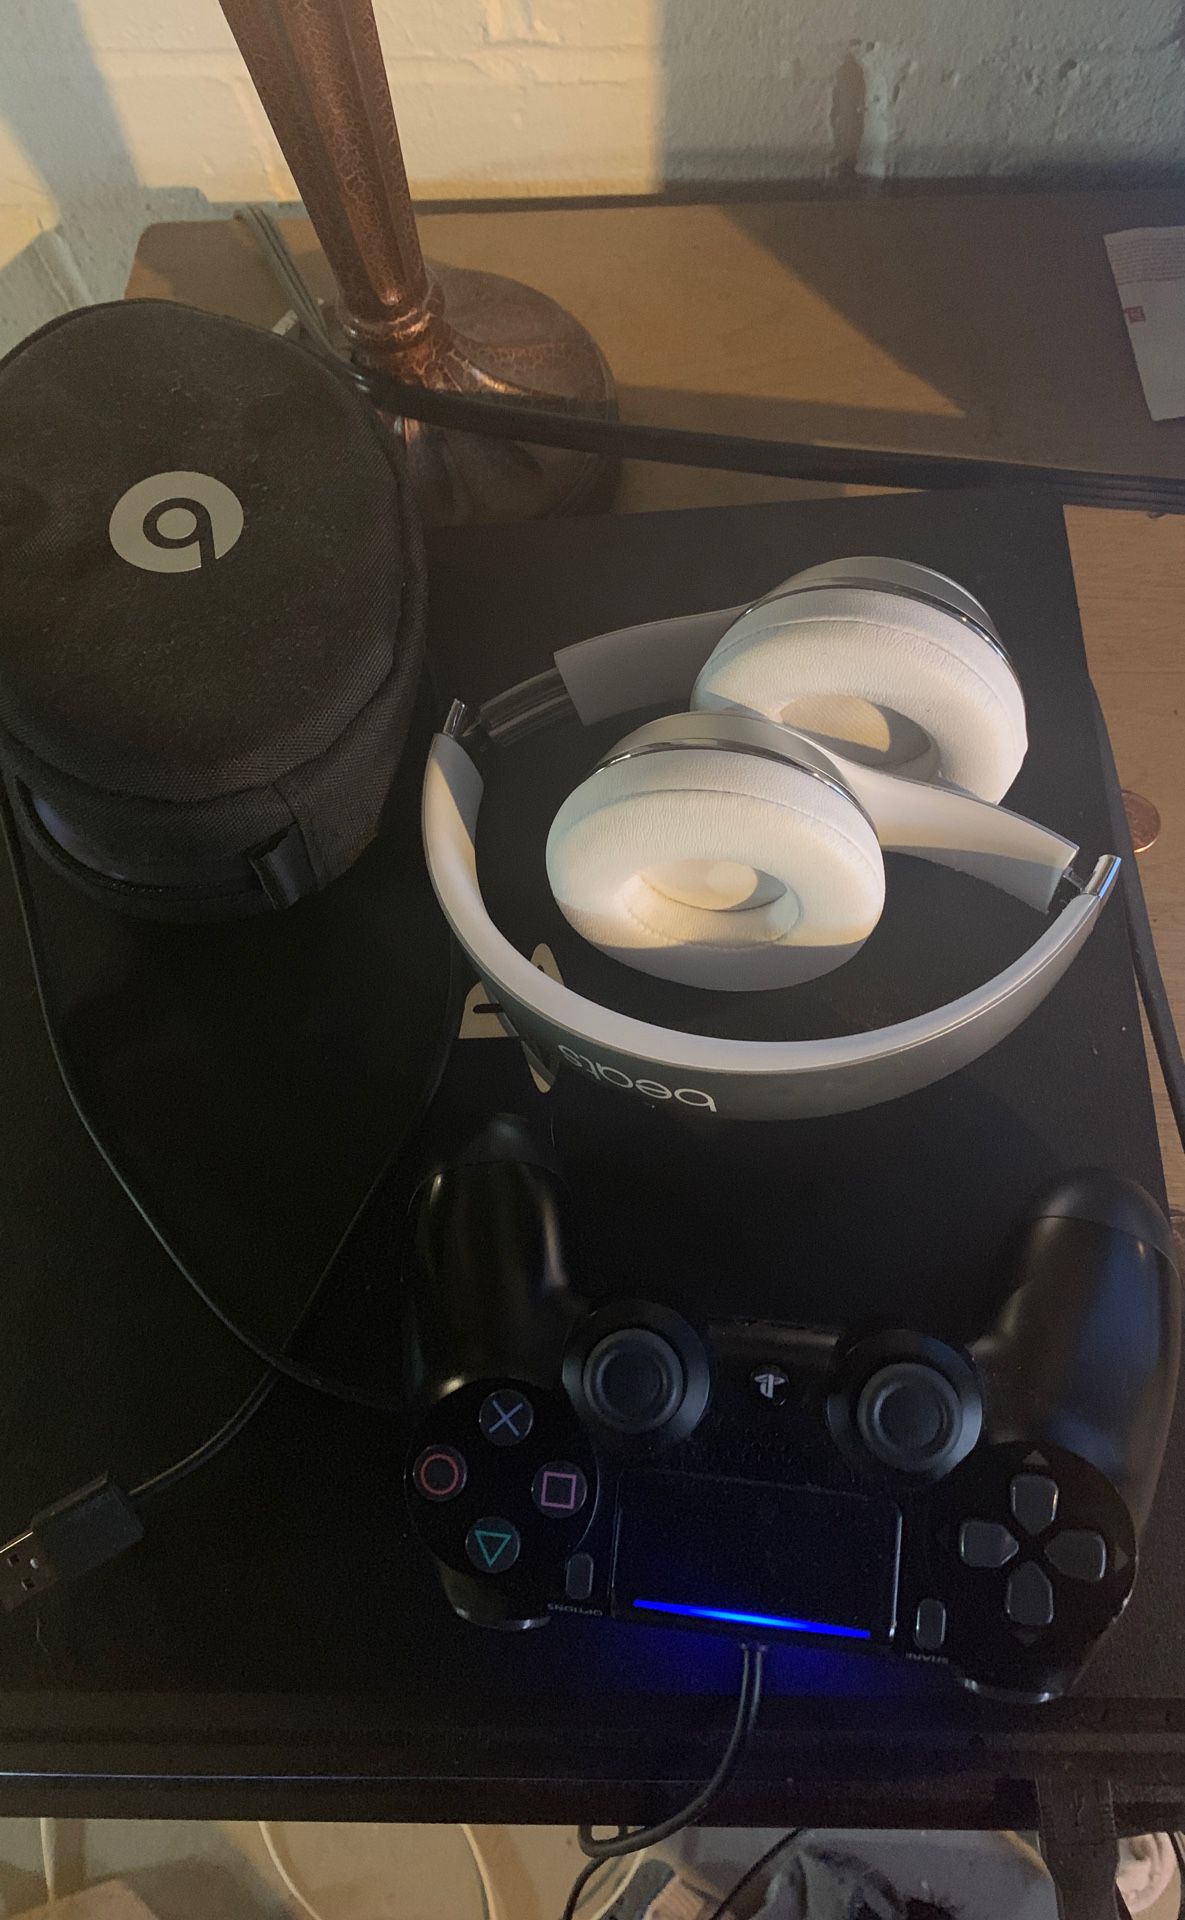 PS4 pro 1TB+Beats solo wireless 3’s. https ://www.paypal.me/RodneyH17